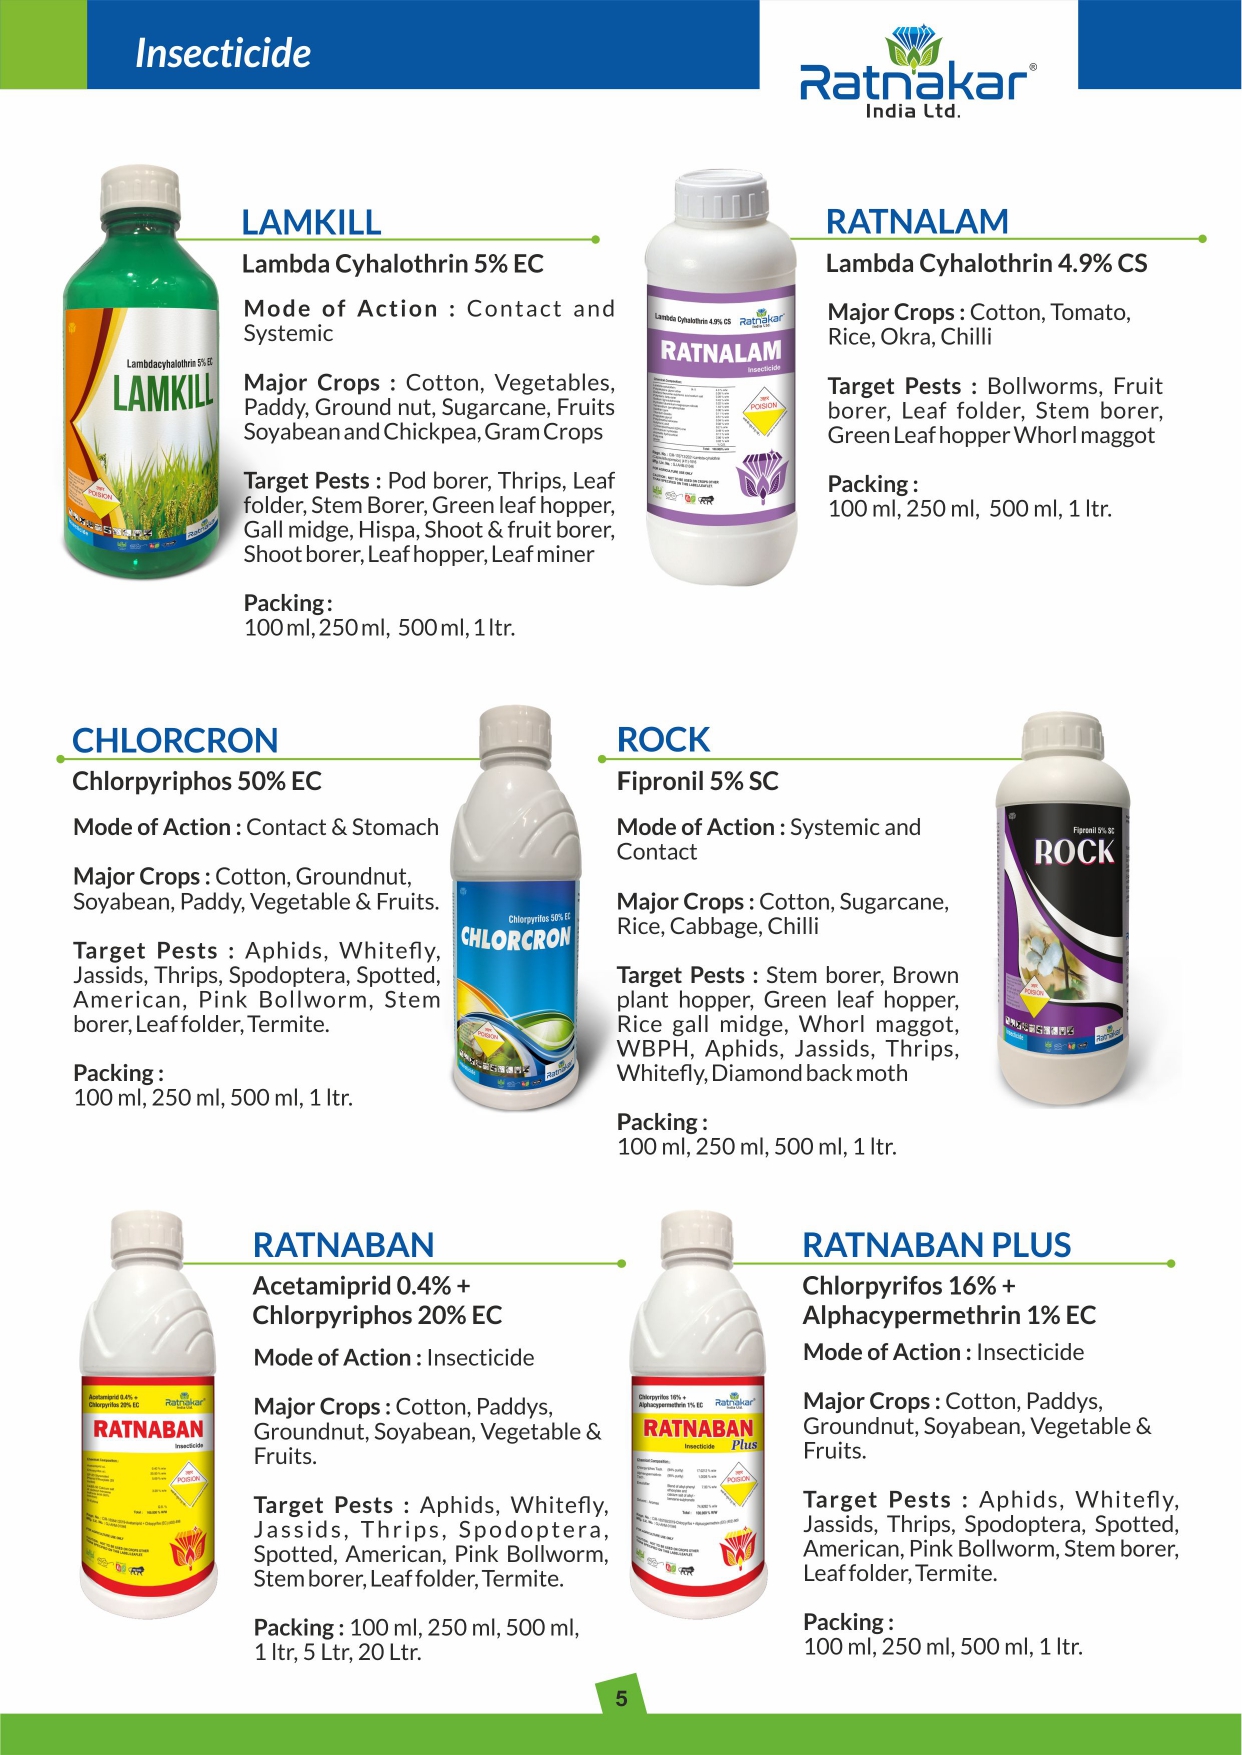 Insecticides from Ratnakar India Ltd